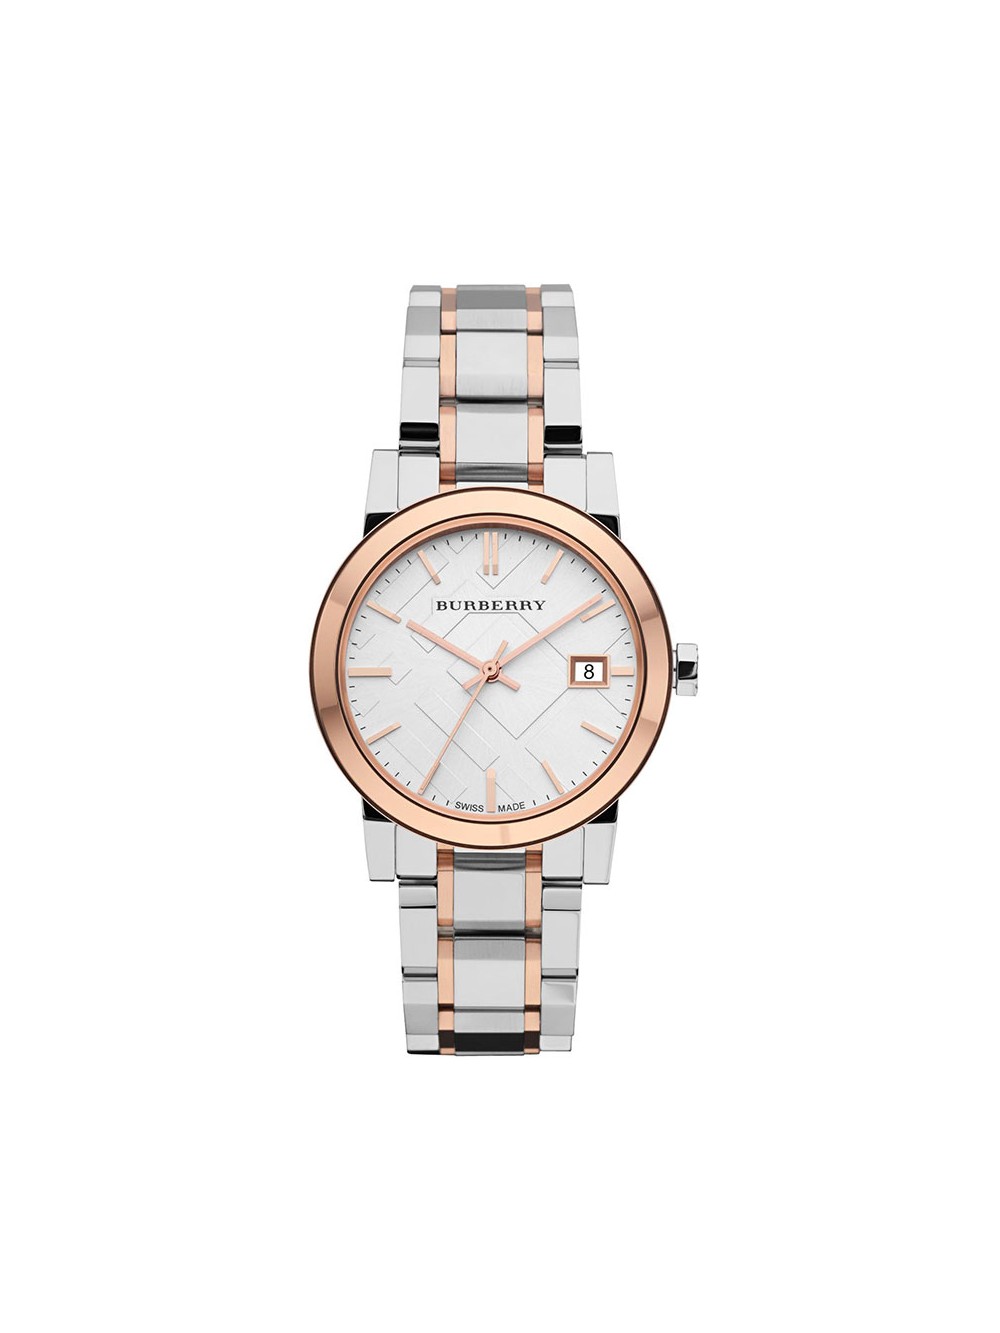 burberry watch for ladies